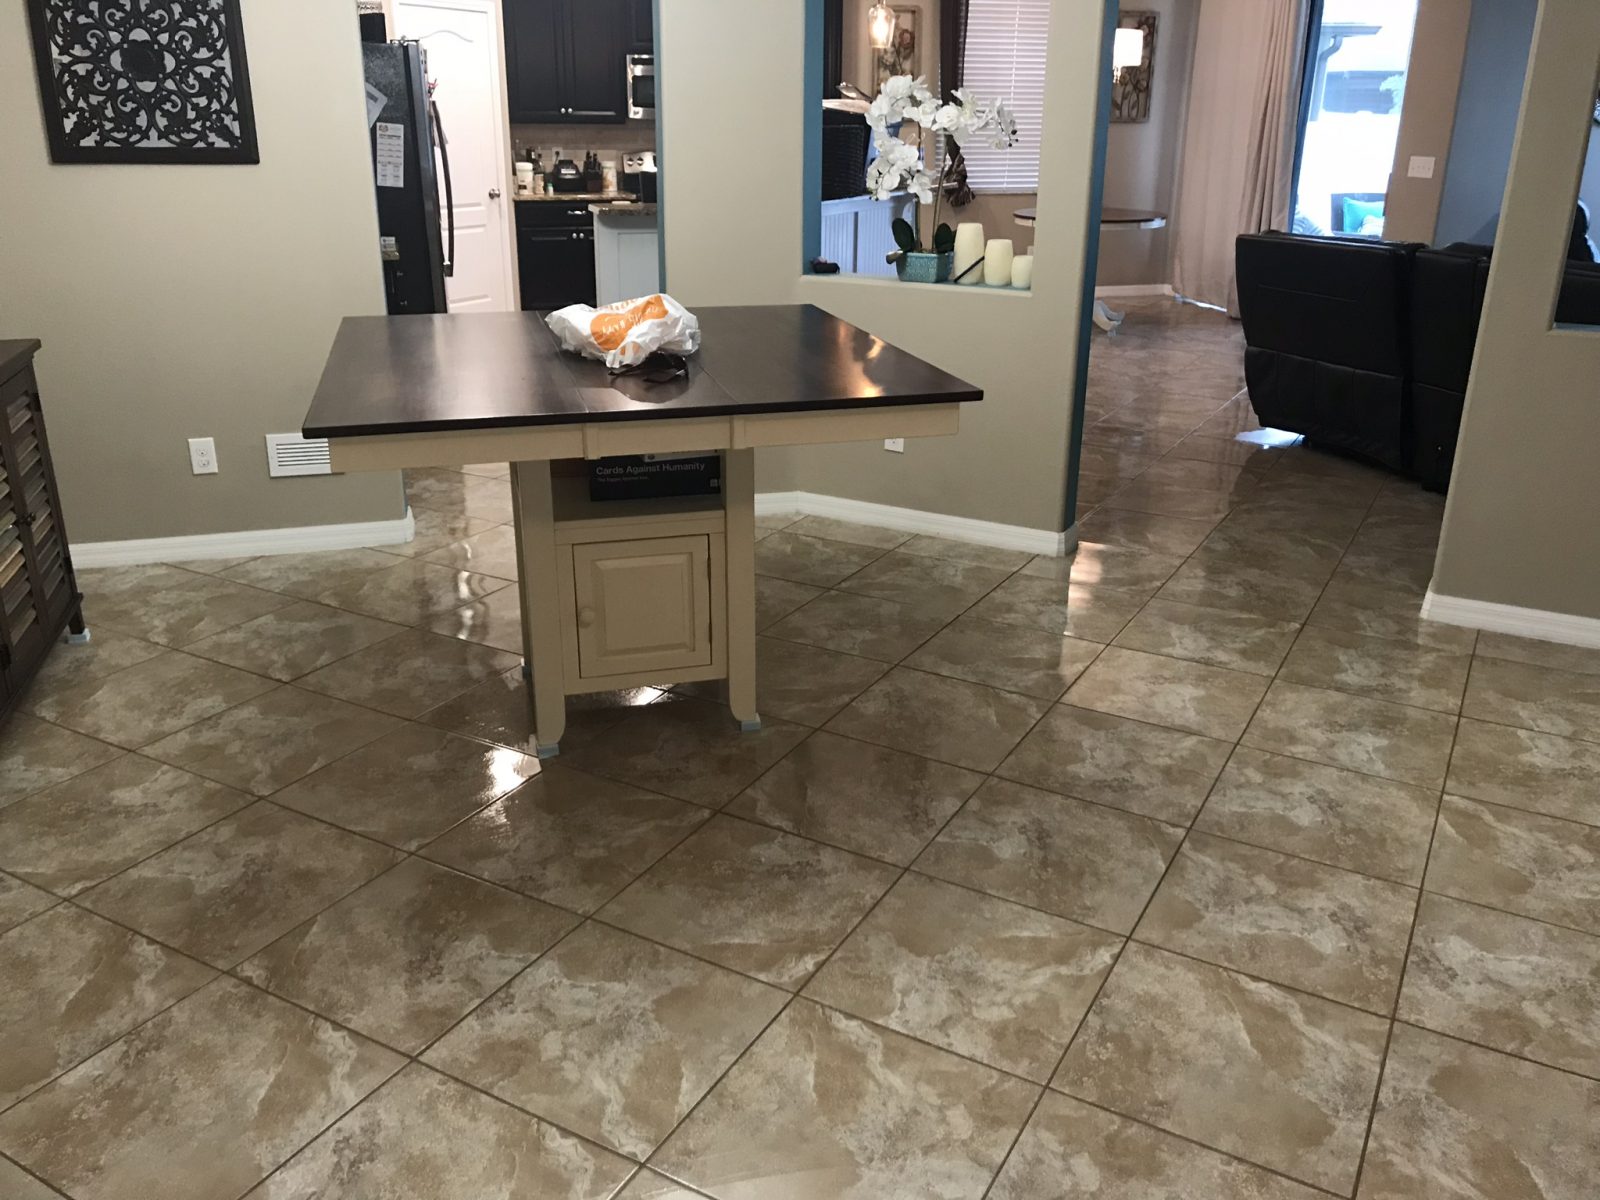 Professional Tile & Grout Cleaning Tarpon Springs Florida by Howards Cleaning Service